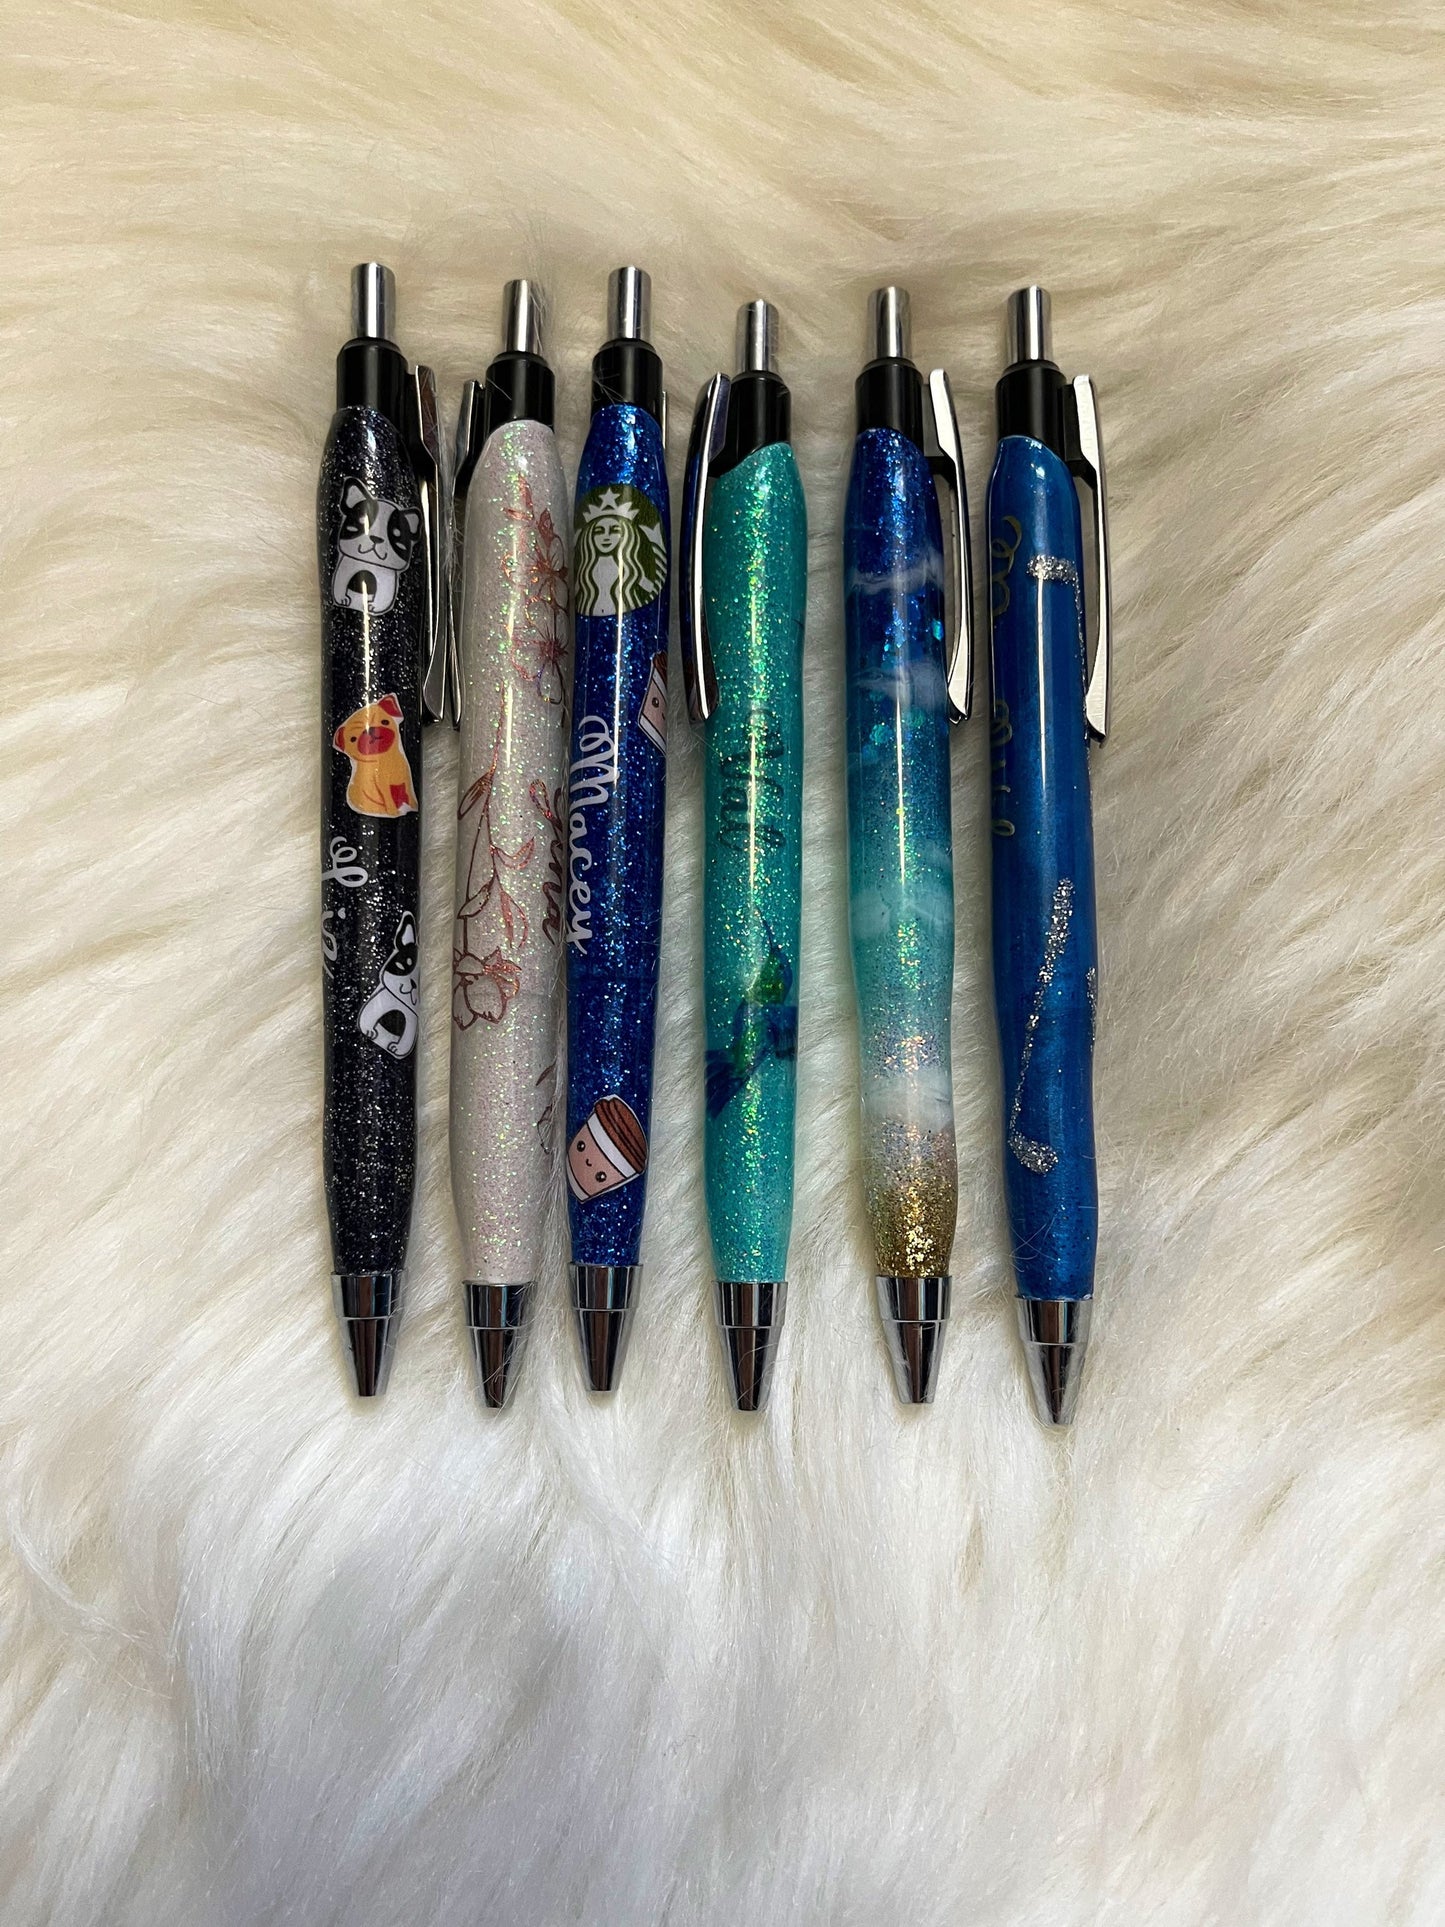 Custom name resin epoxy glitter pens with clip ballpoint pen retractable gift for him her friend co-worker teacher occassion birthday